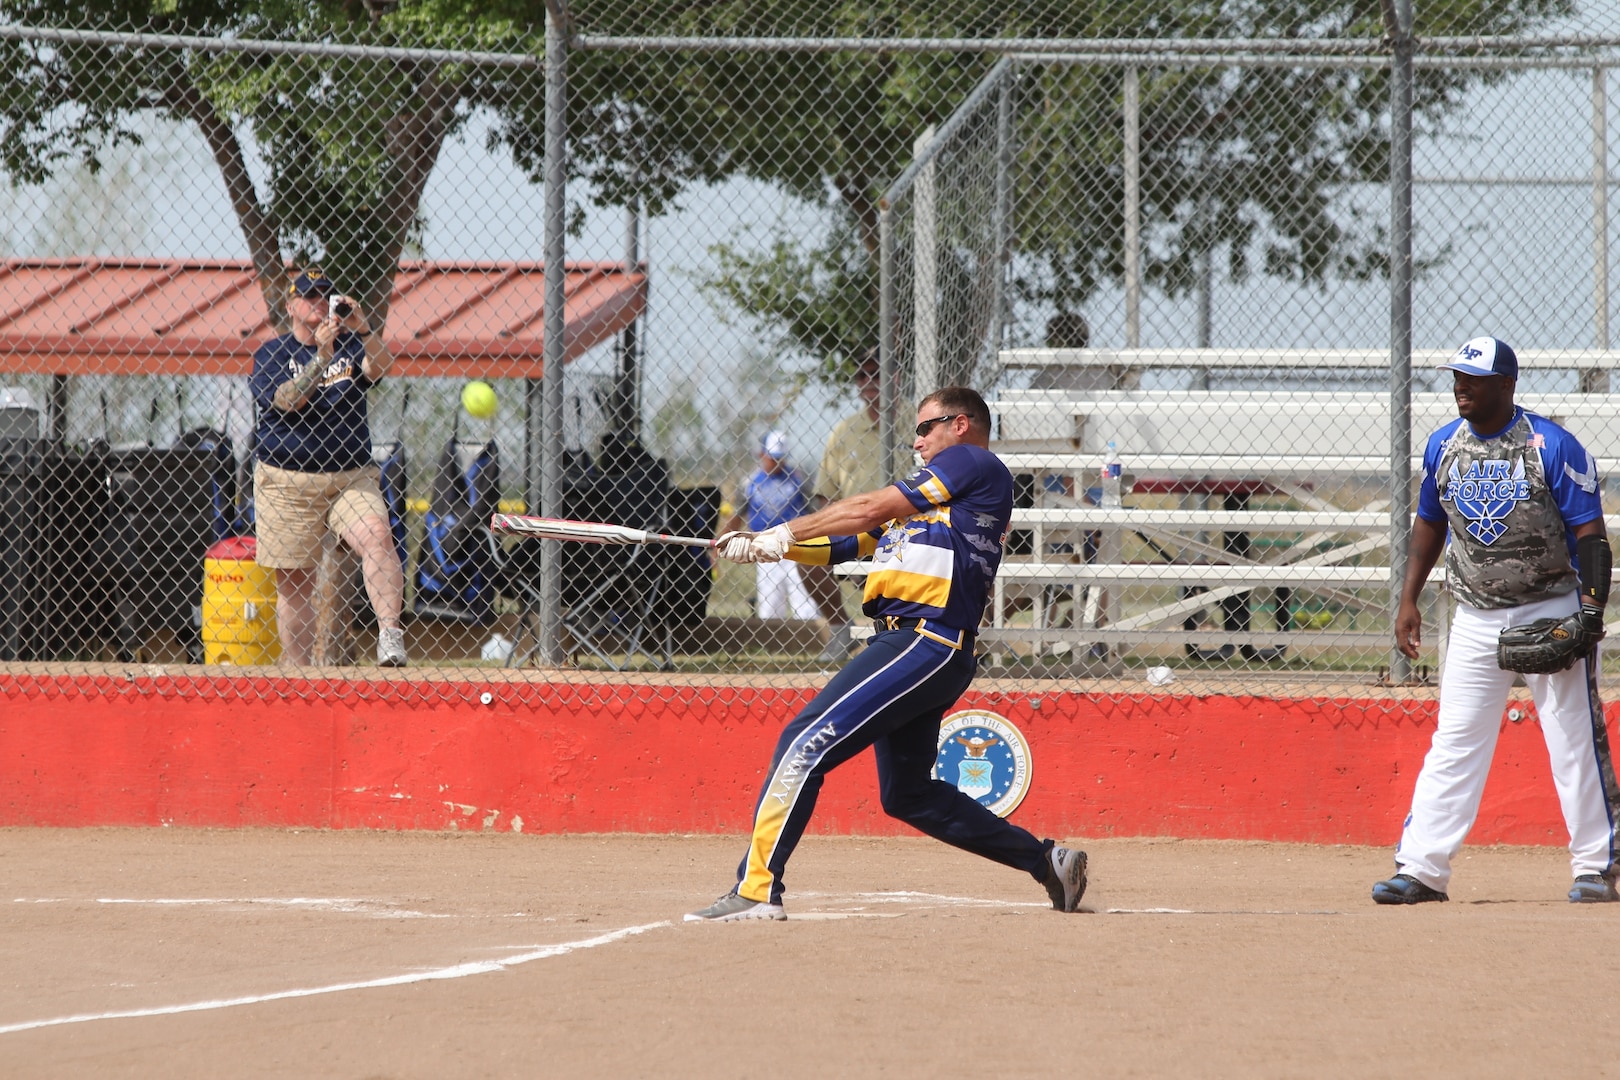 Navy at bat during the 2014 Armed Forces Softball Championship at Fort Sill, Okla. 14-19 September.